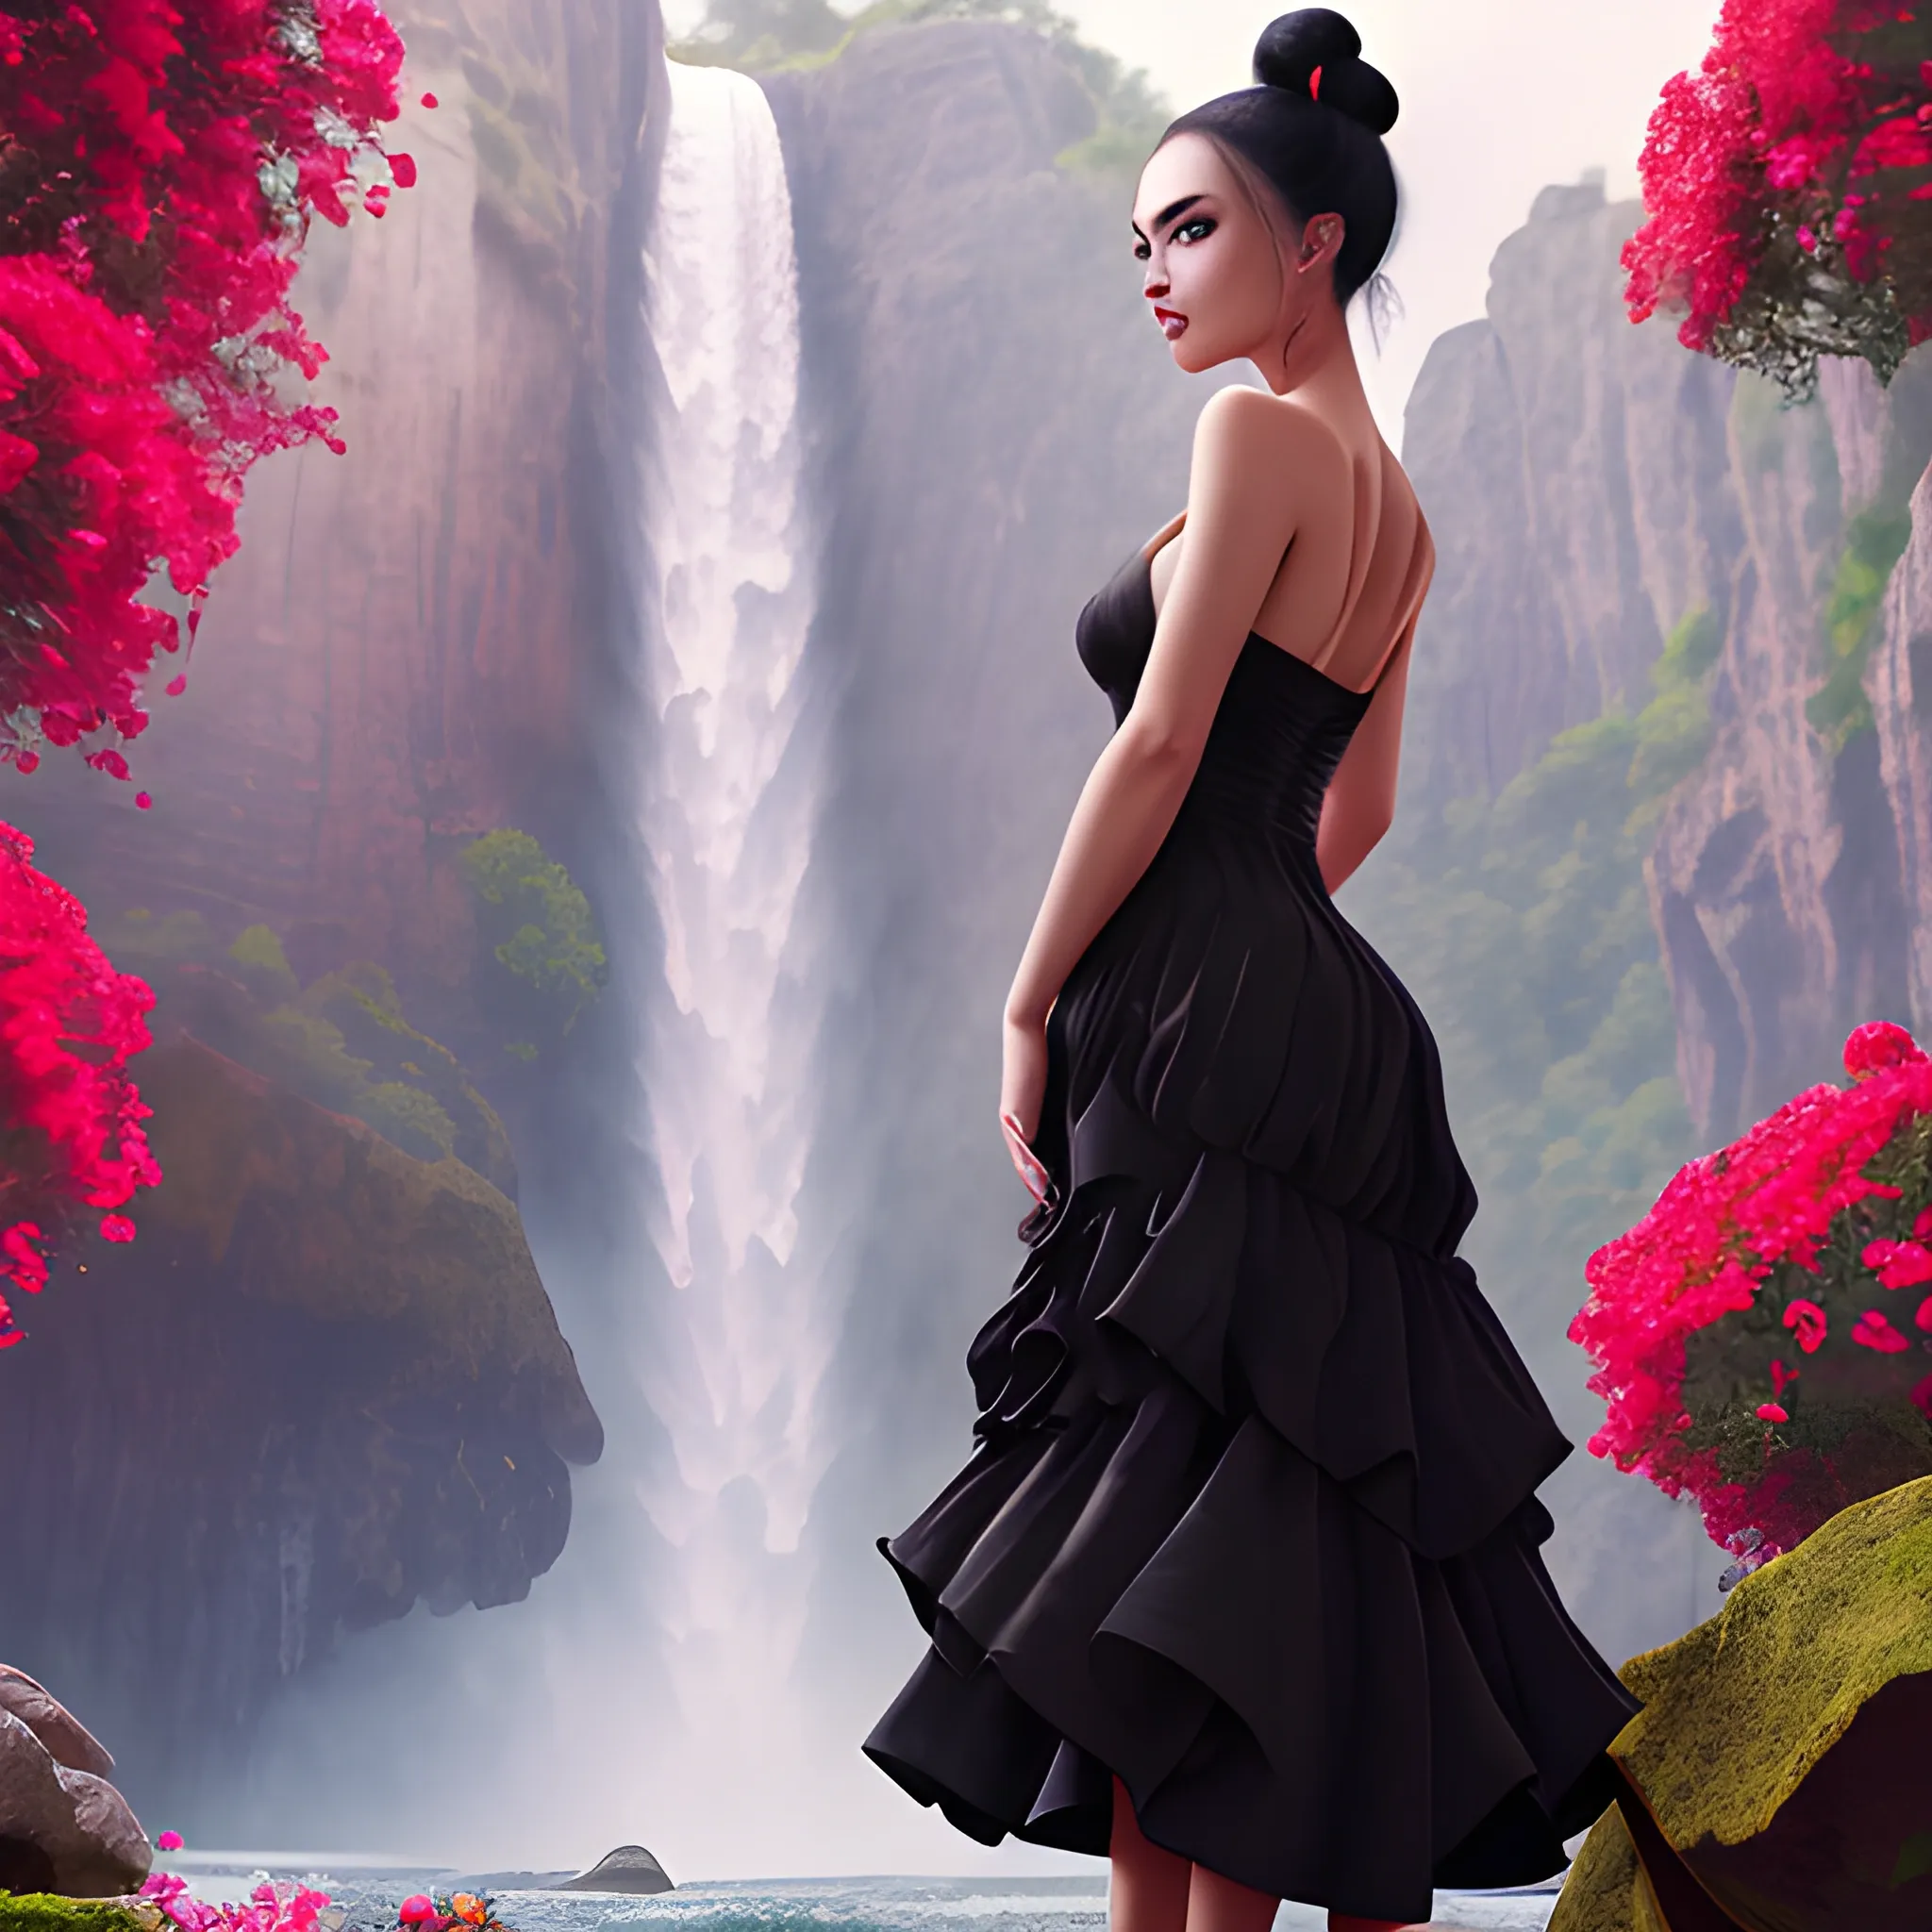 Very beautiful woman, black hair, bun hair, sexy red 
dress, standing on big stone, pink roses, romanticism, high detail, 8K resolution, ultra high definition picture, 1 waterfall background